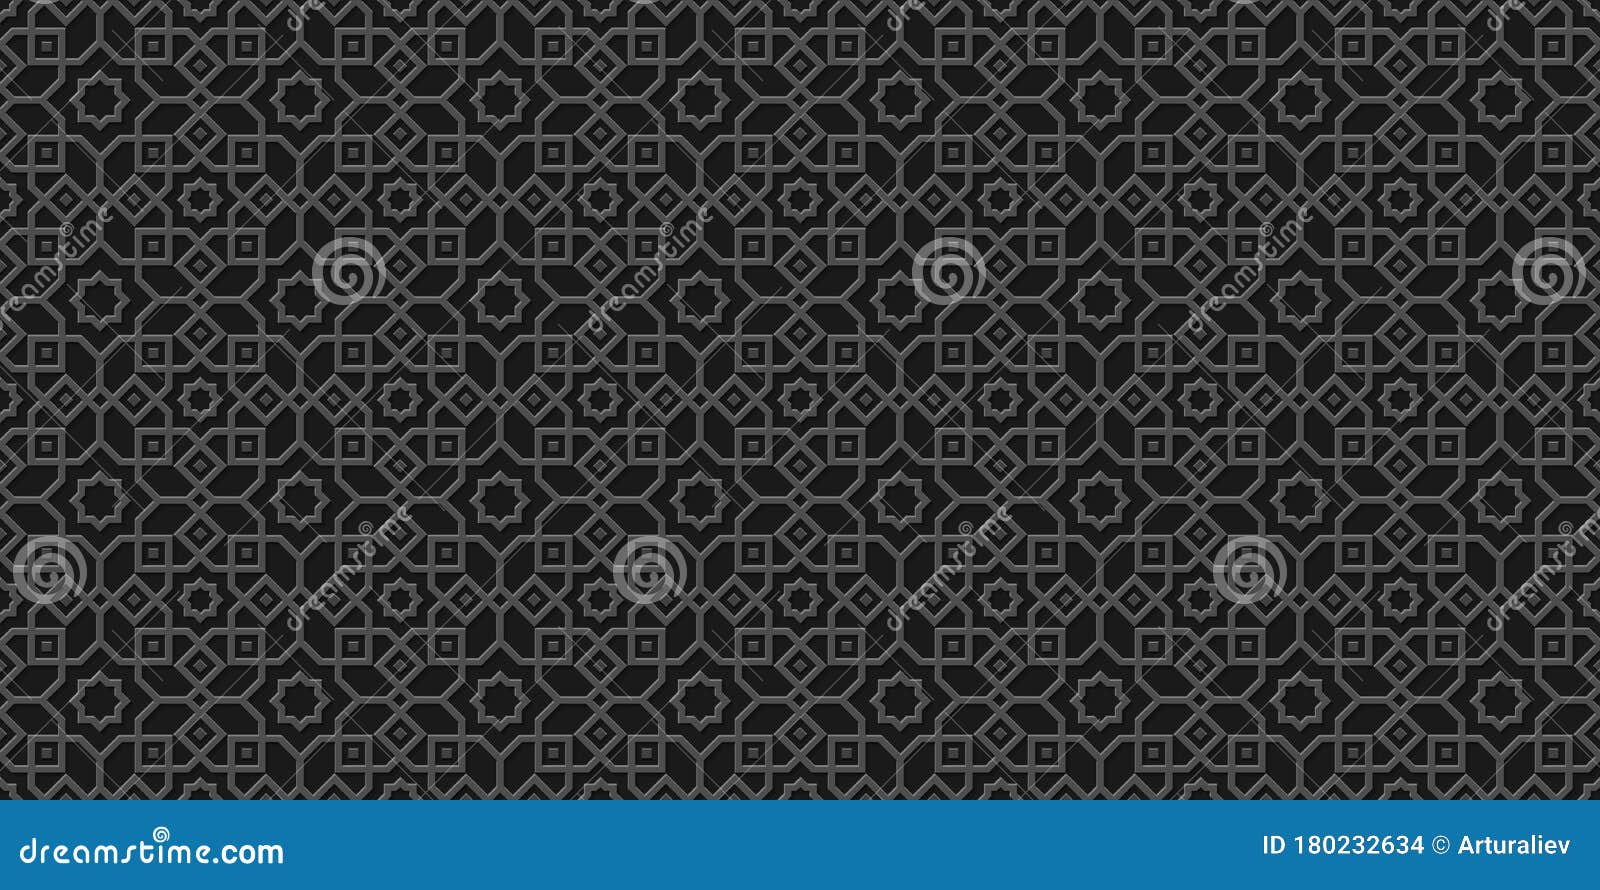 black arabic background, islamic pattern,carved style